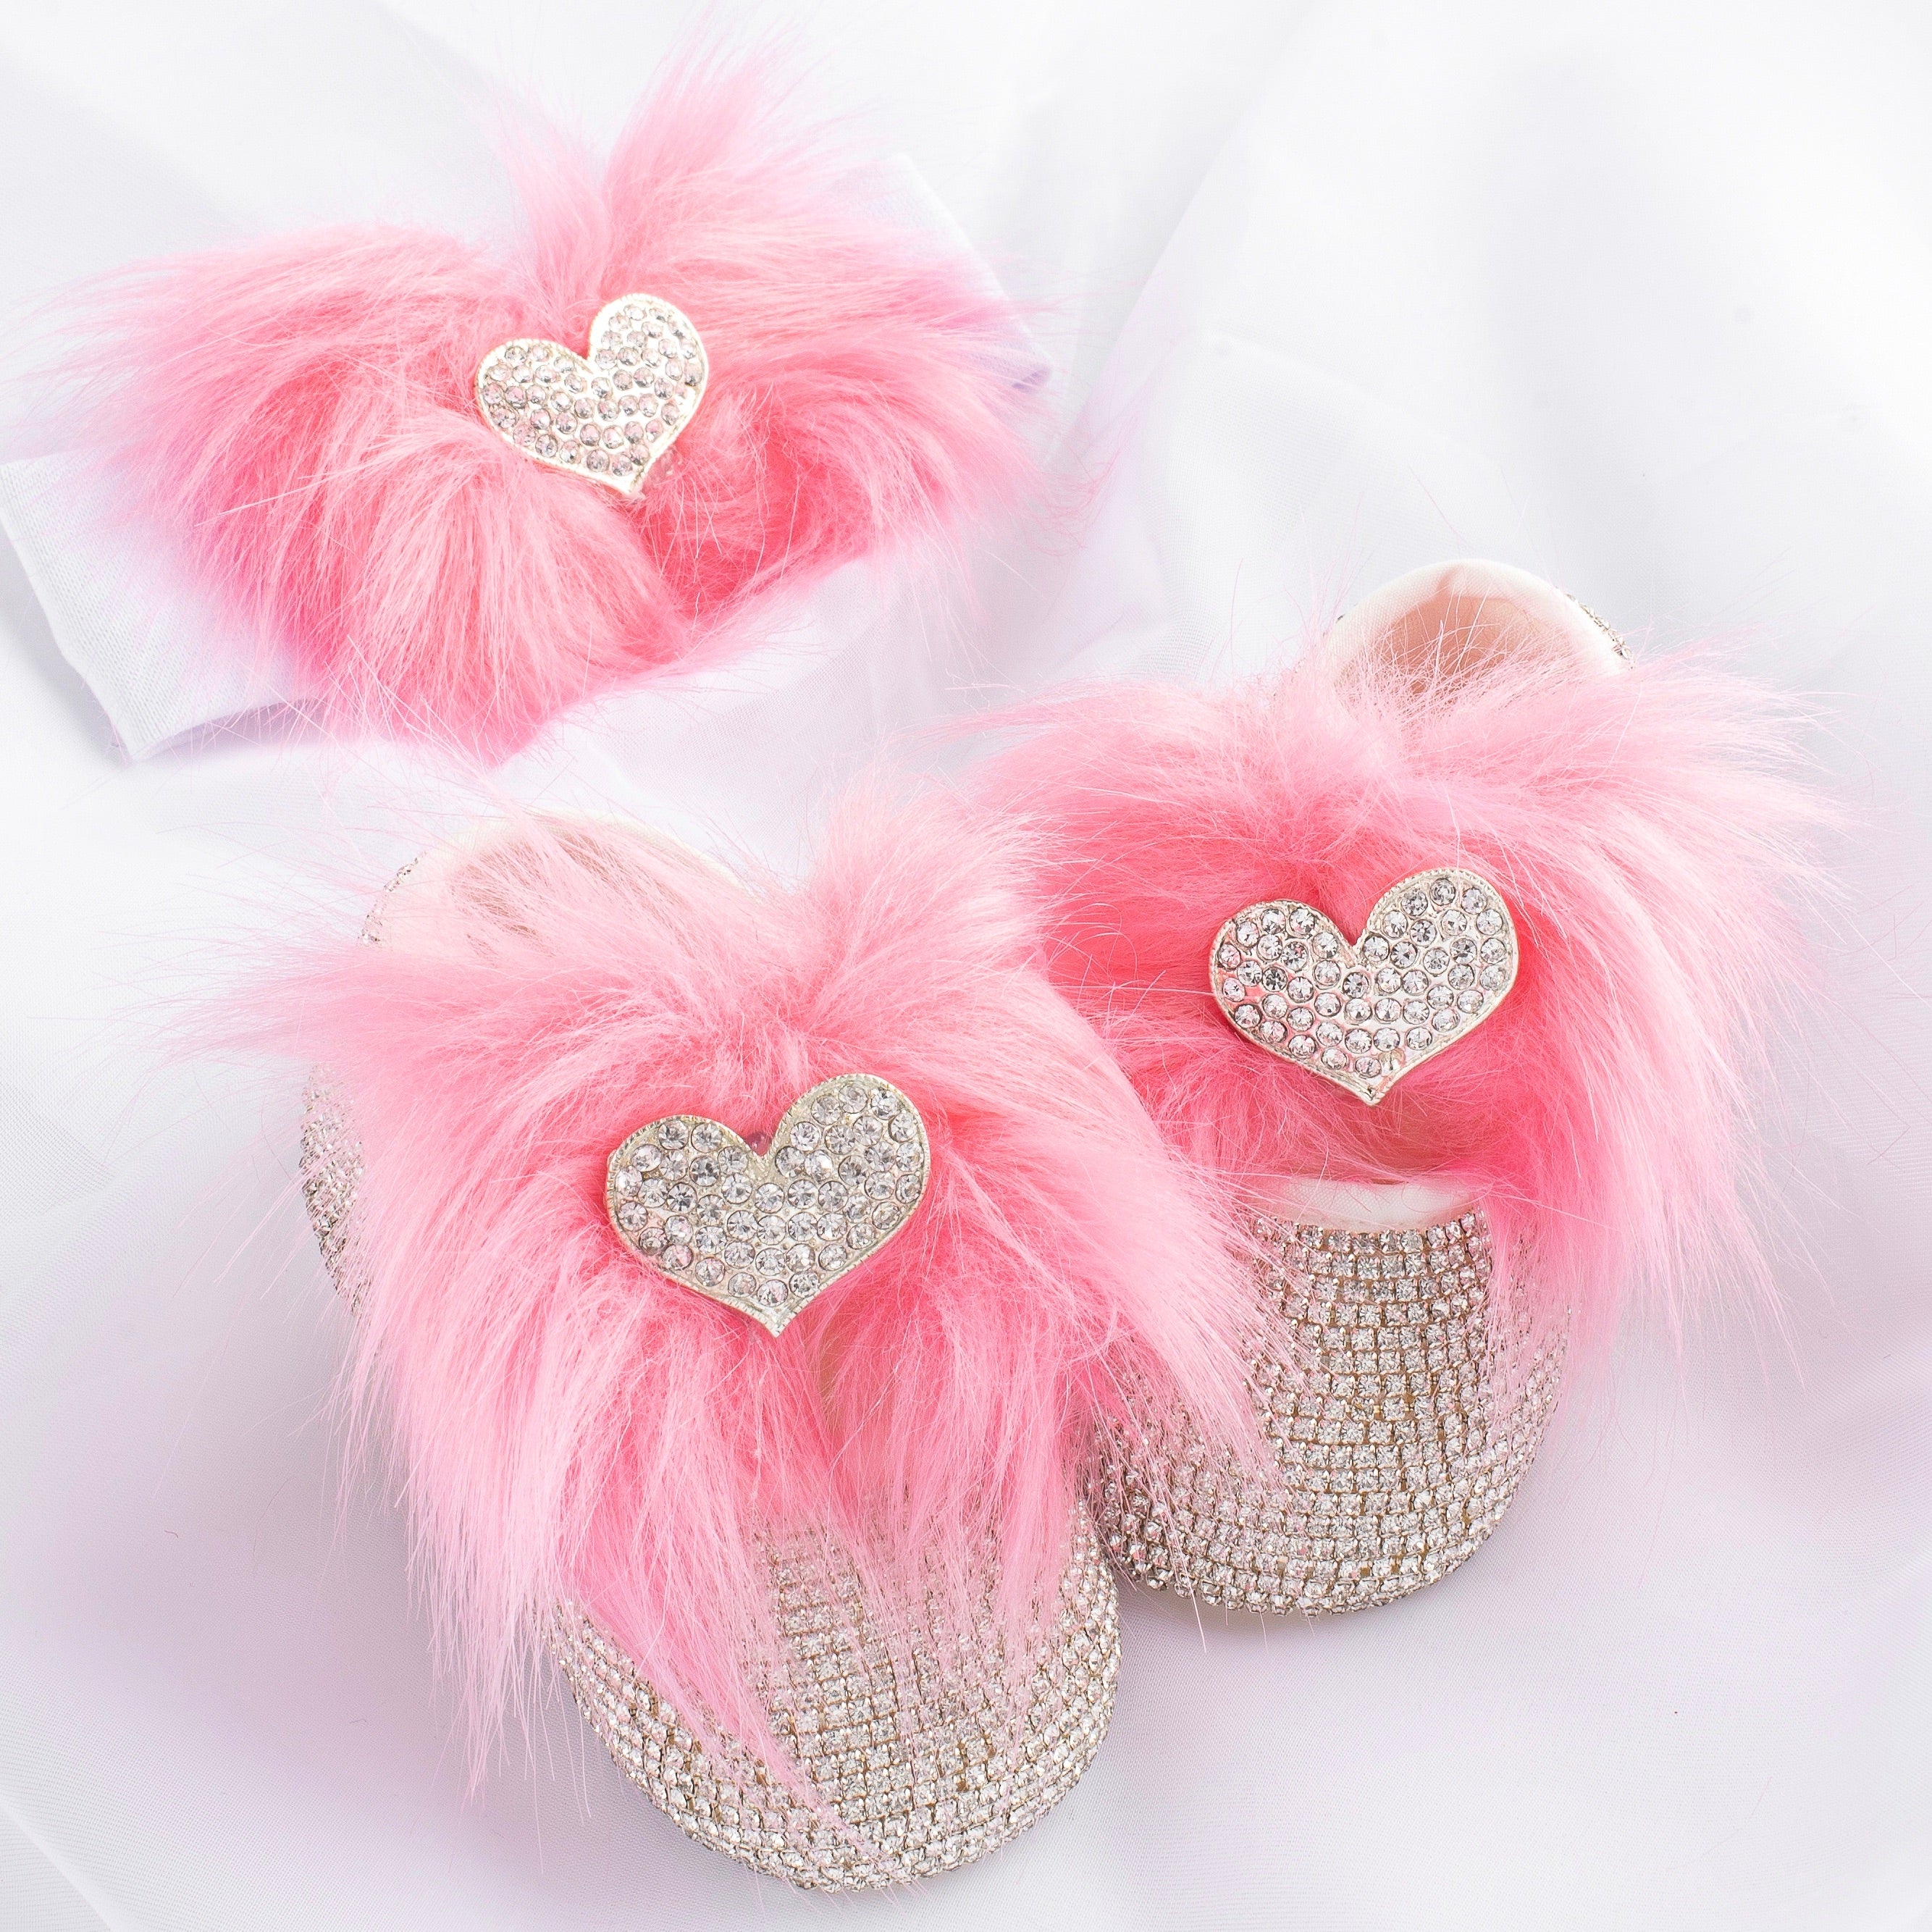 Handmade Cute Bling Baby Fur Shoes and Headband Red / 8-12 Months